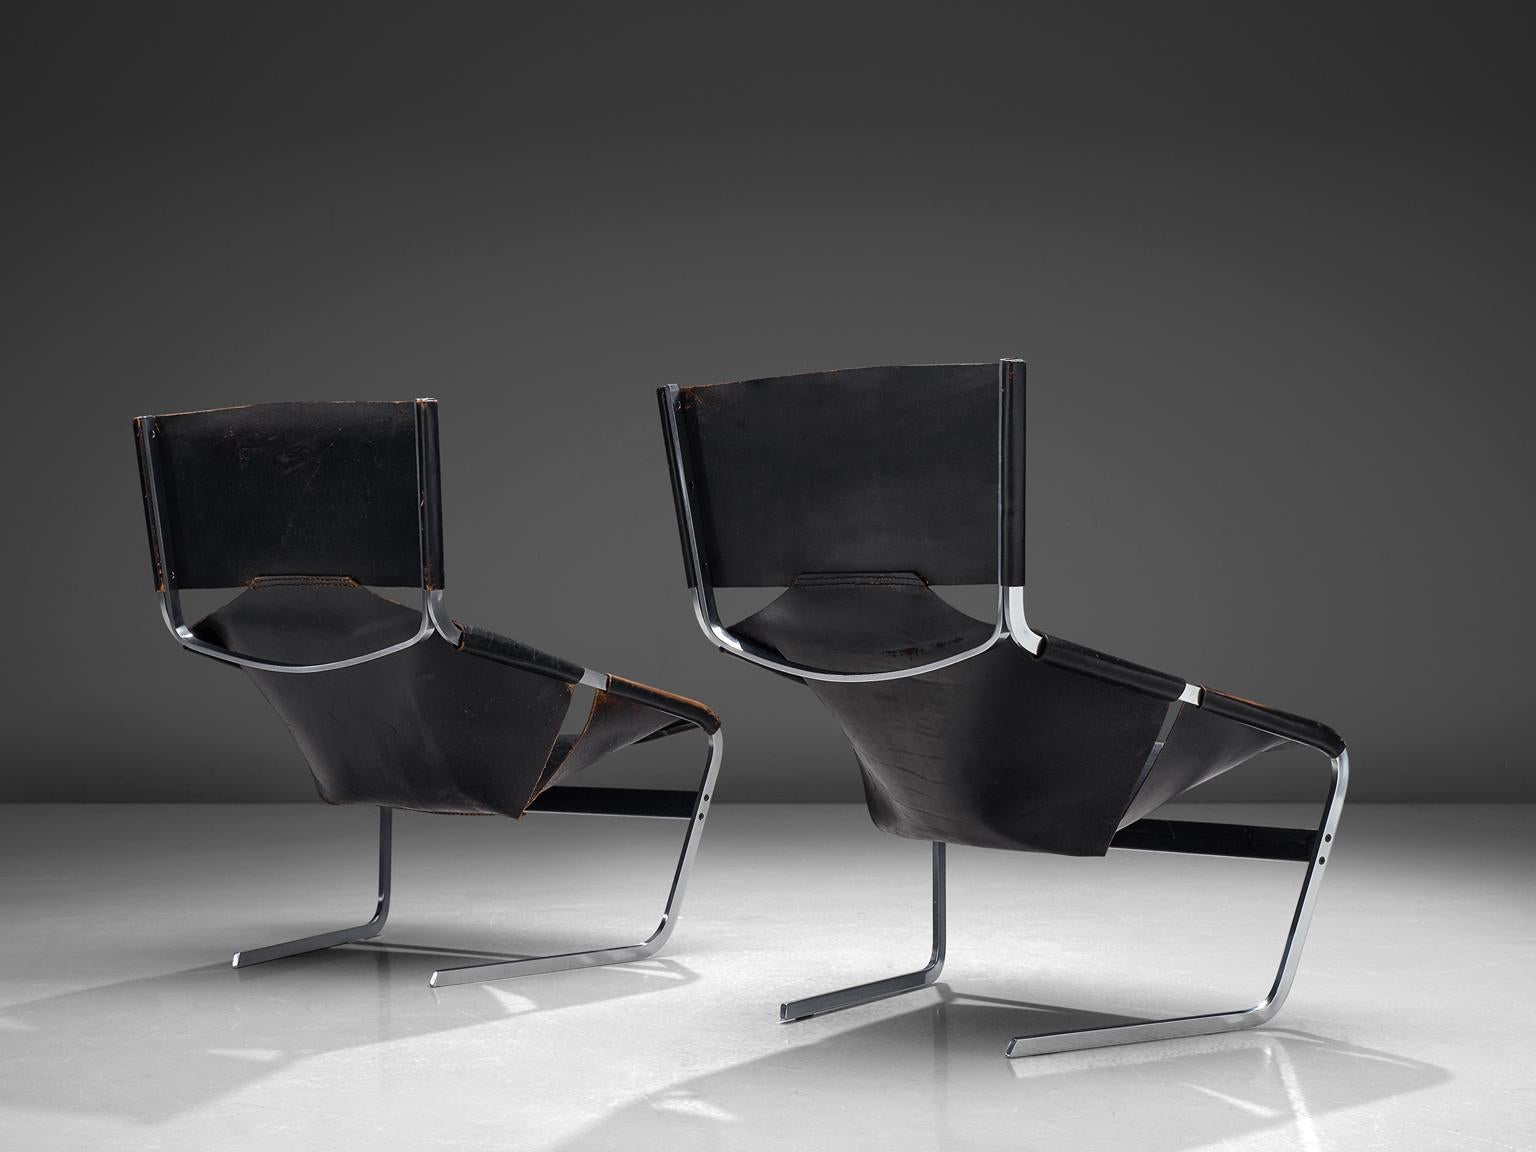 Pierre Paulin for Artifort, F444 easy chairs, metal and black leather, the Netherlands, circa 1962.

These black leather F-444 chairs are designed by Pierre Paulin for Artifort in 1962. The chairs show sharp lines and features an angled open seat